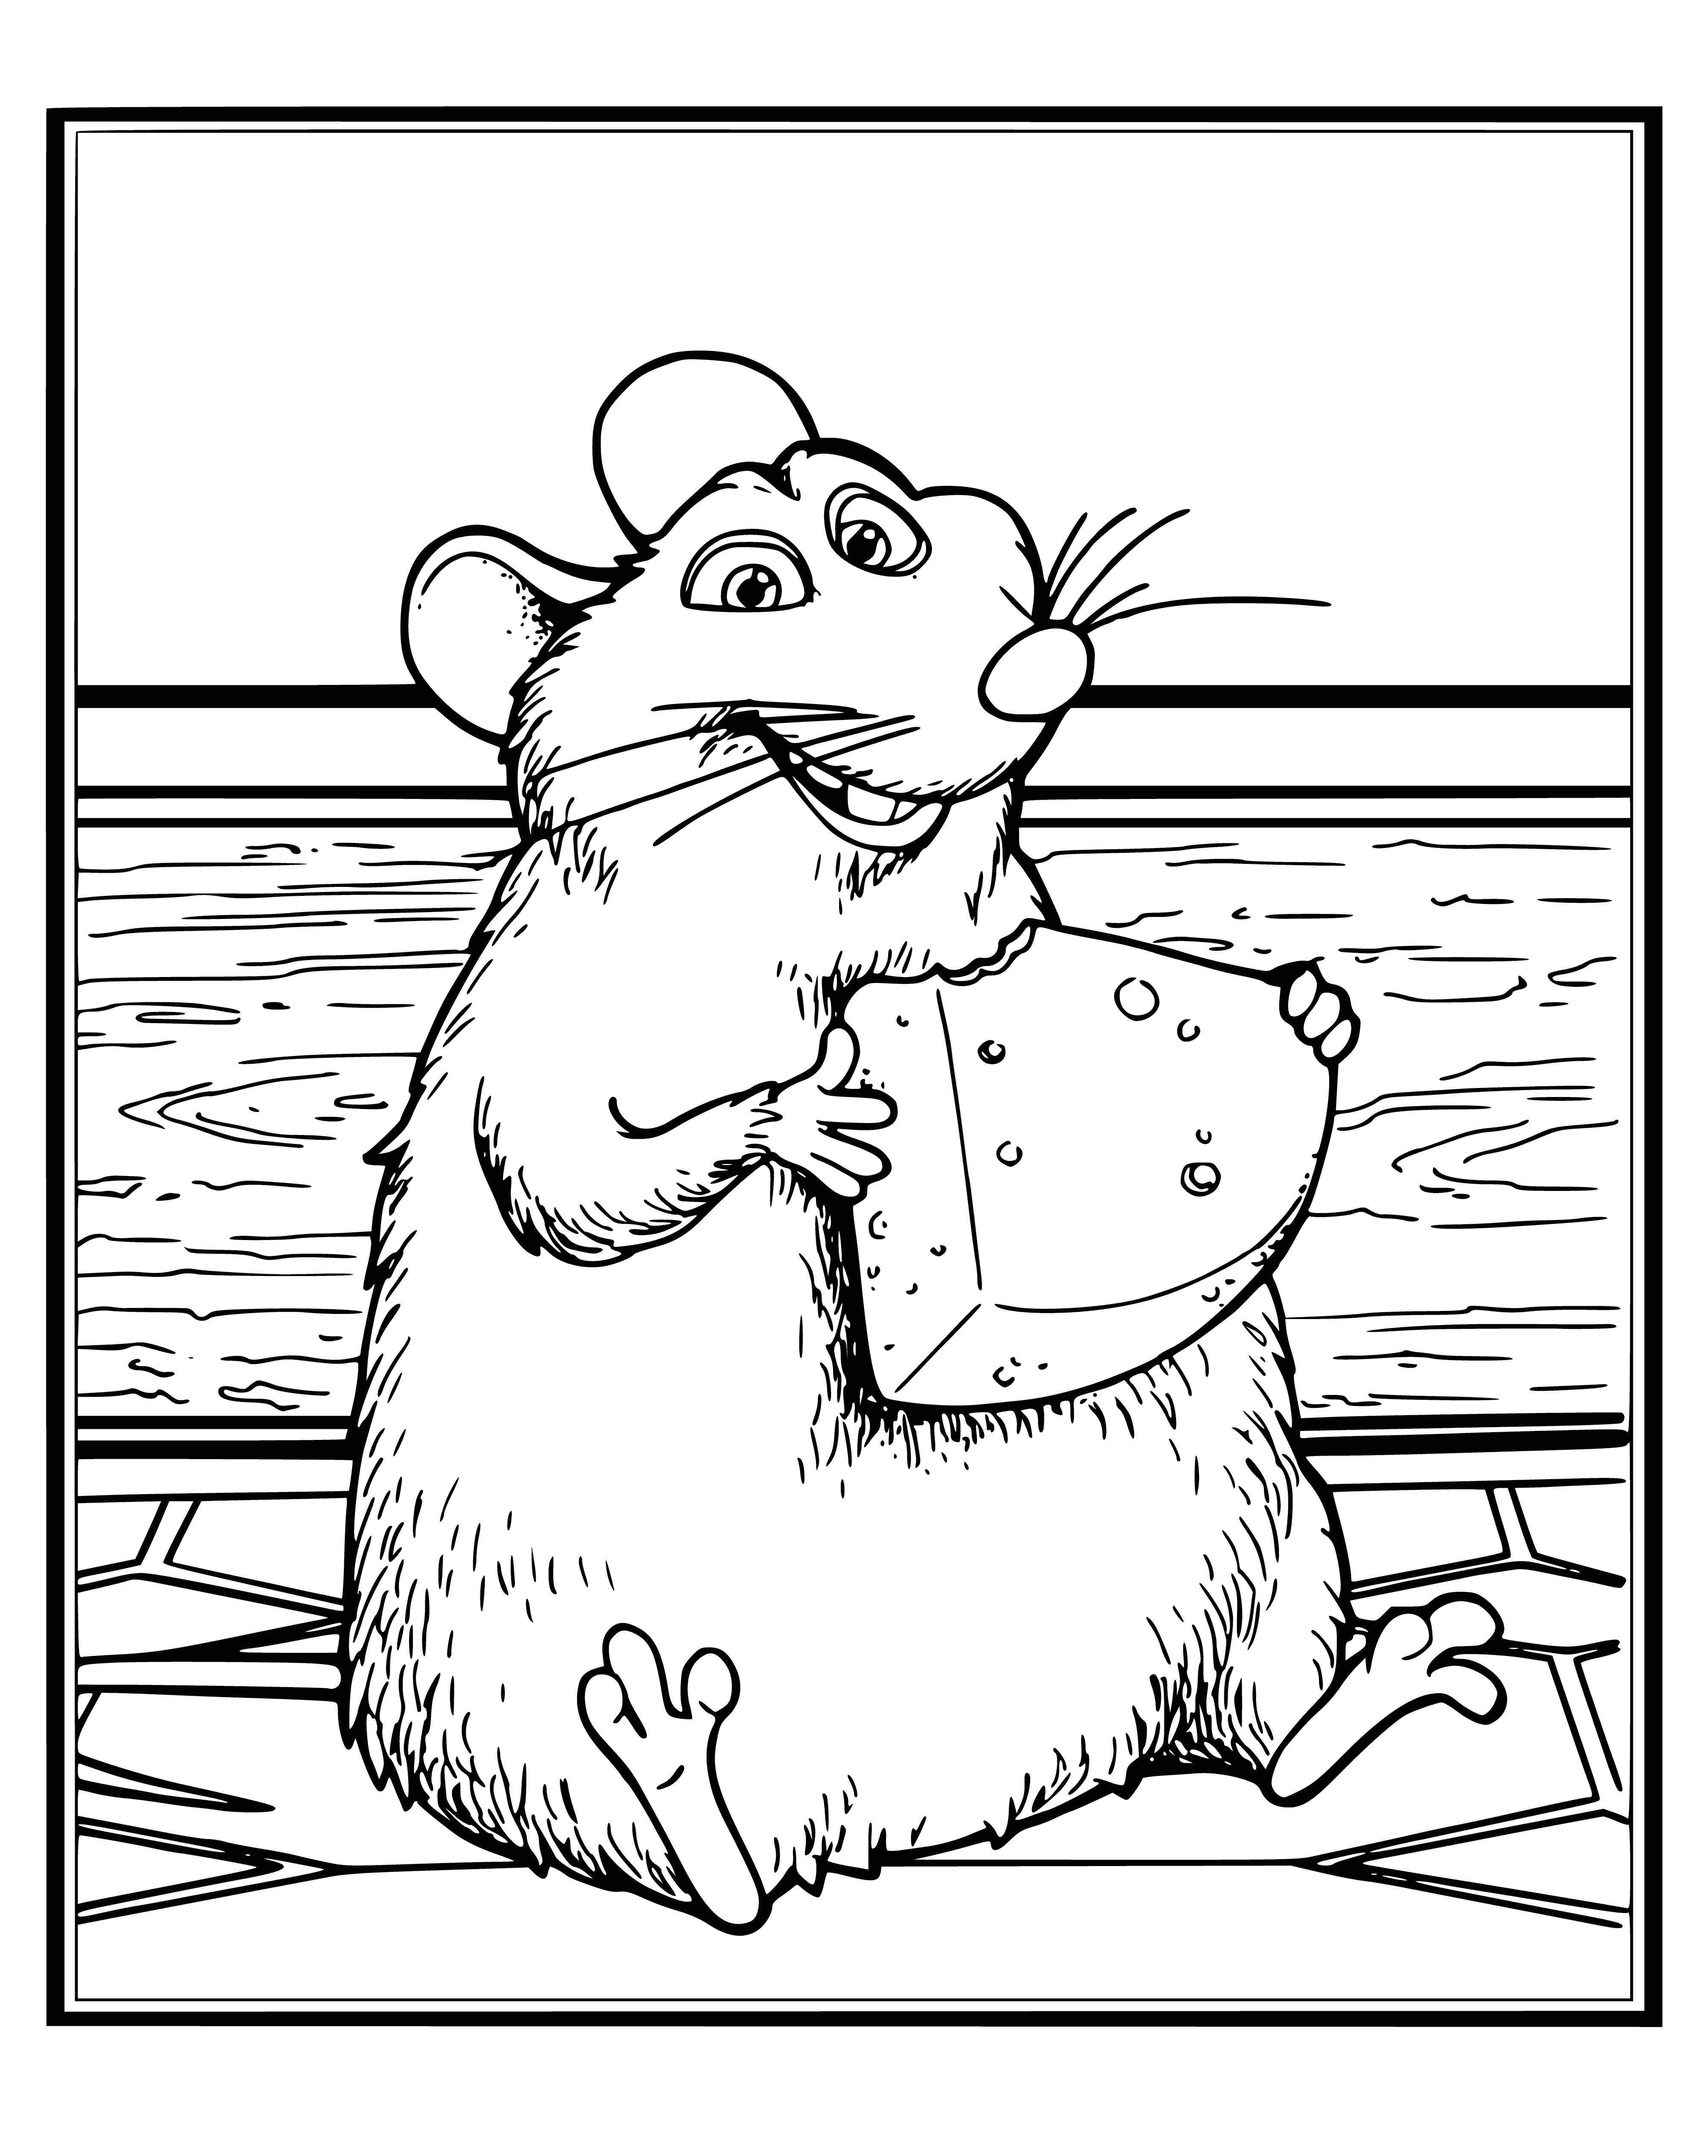 Emil, cousin Remi coloring page